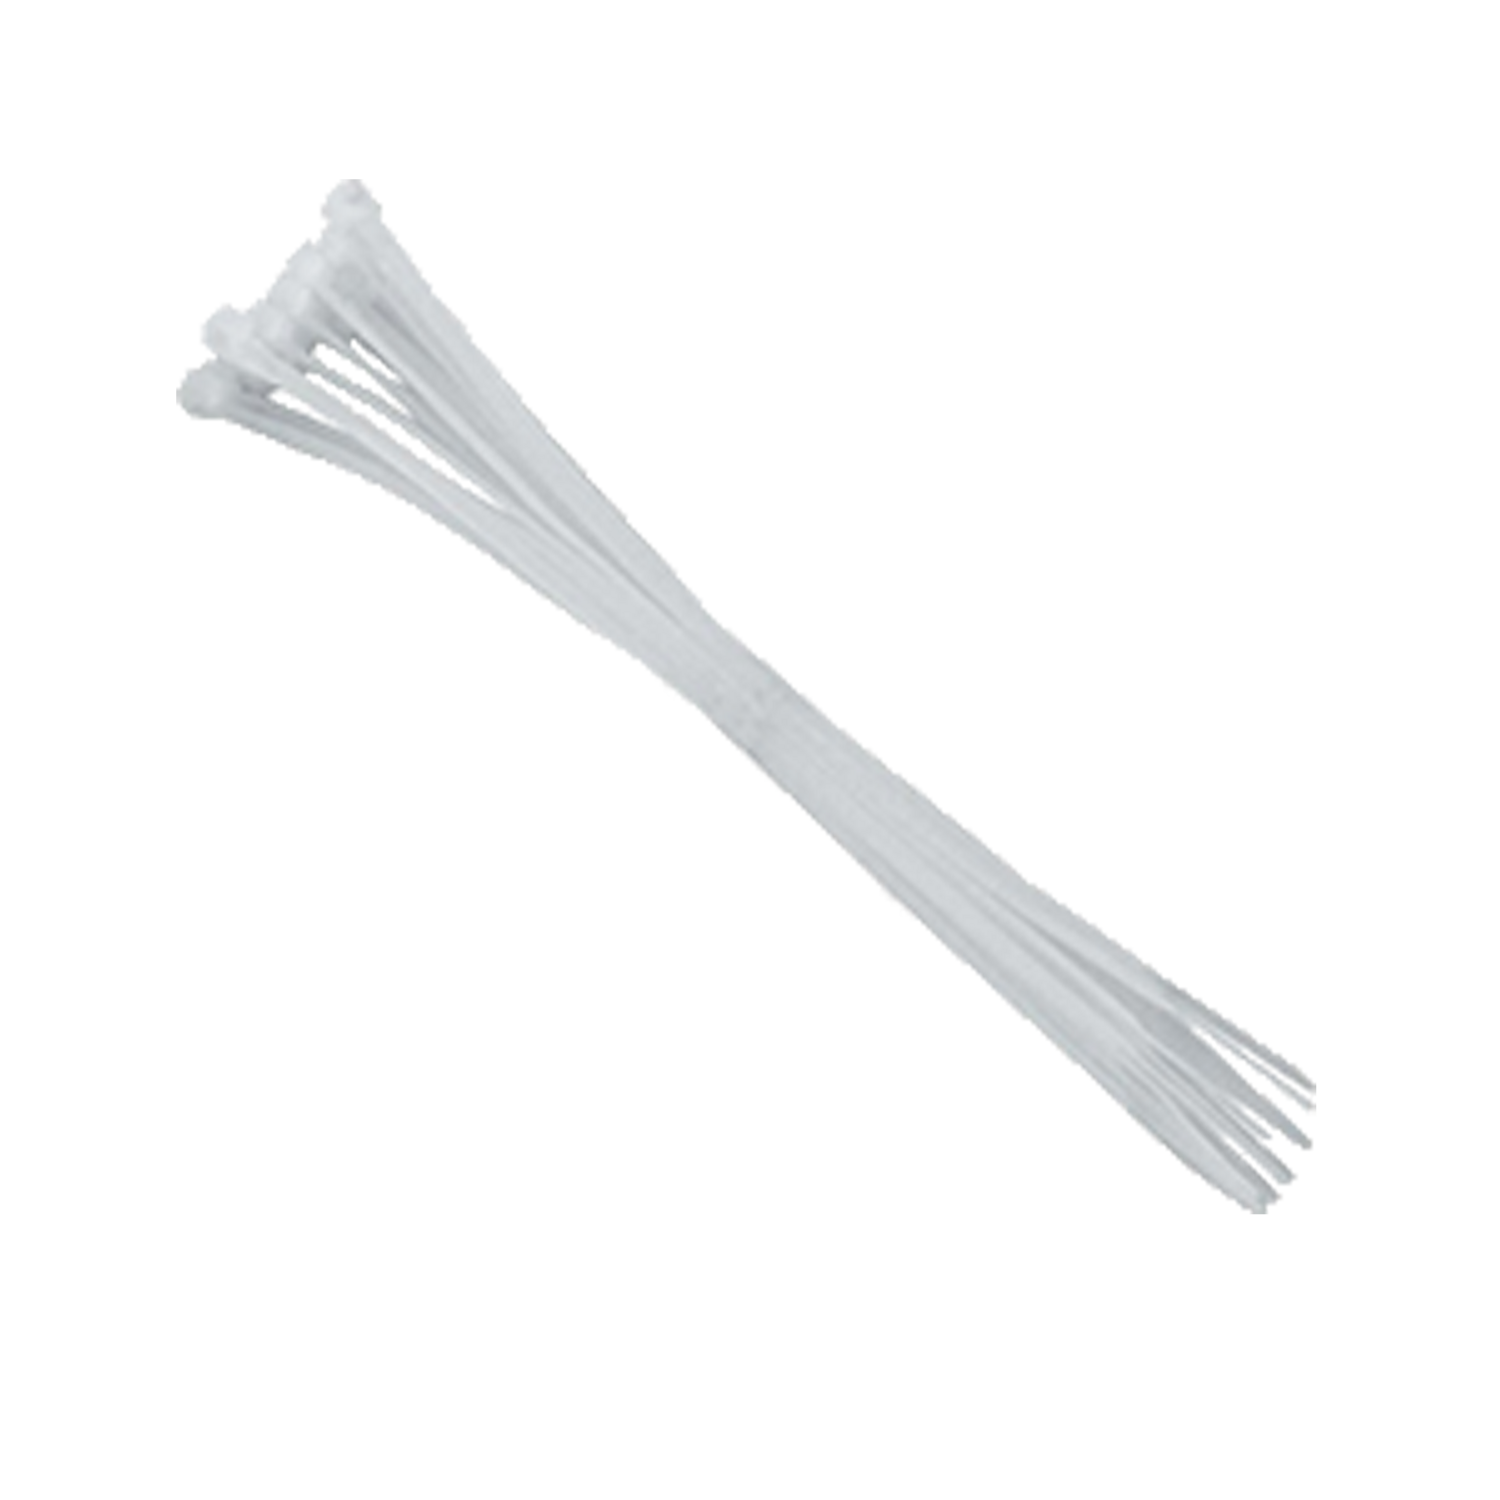 Homeaid WHITE NYLON CABLE TIES 3.6mm x 300mm x 100 pieces